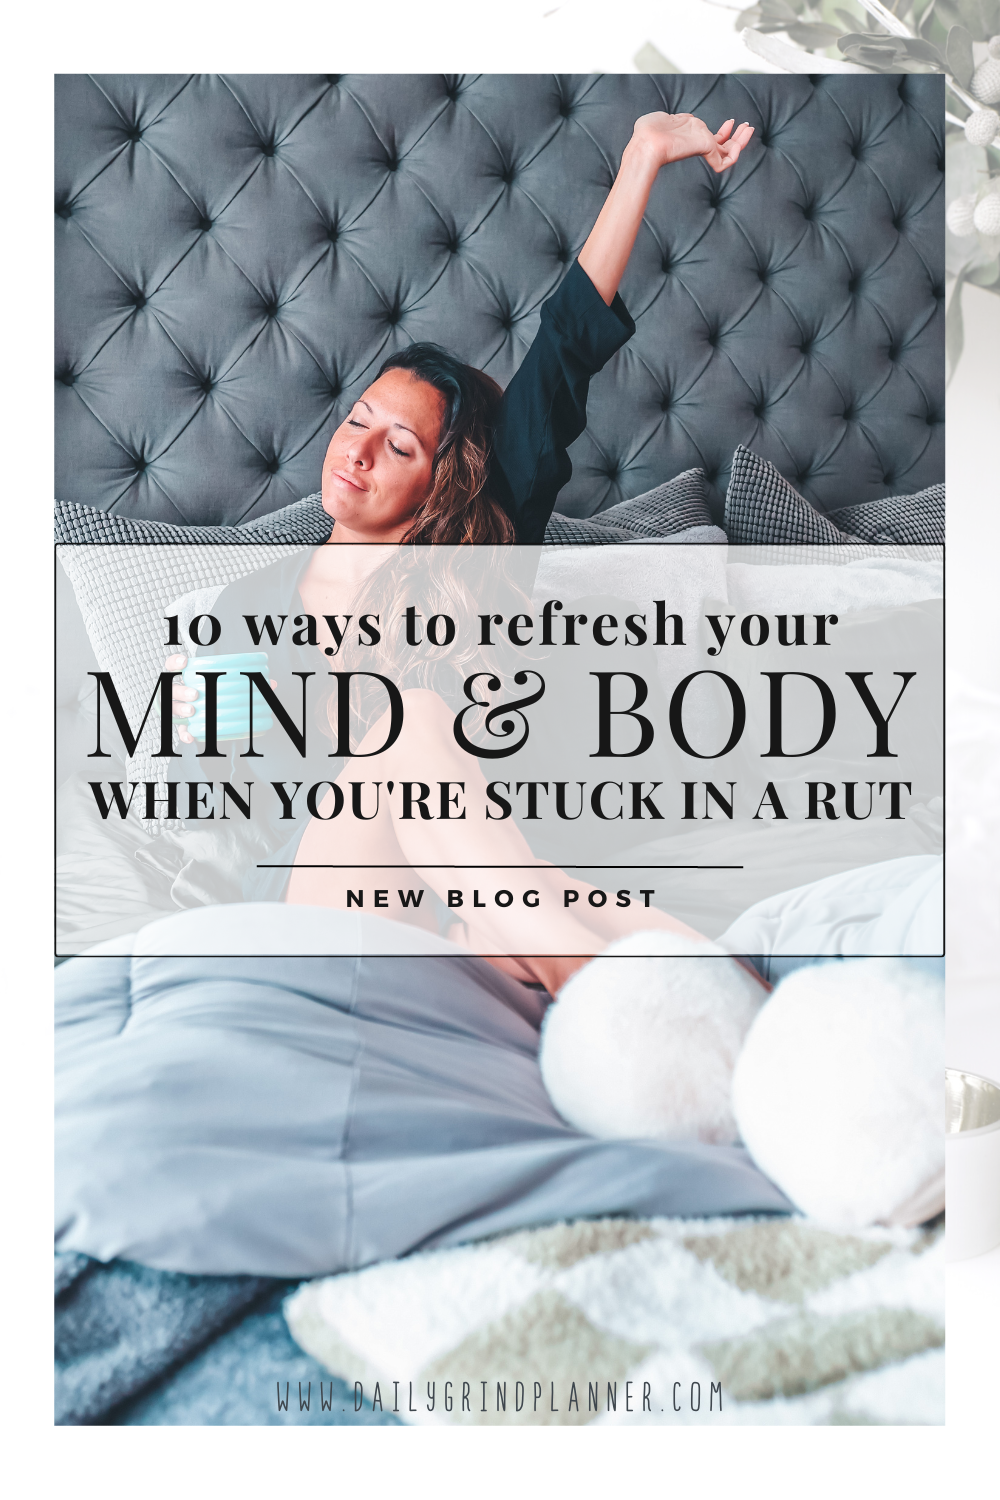 10 Ways to Refresh Your Mind & Body When You’re Stuck in a Rut